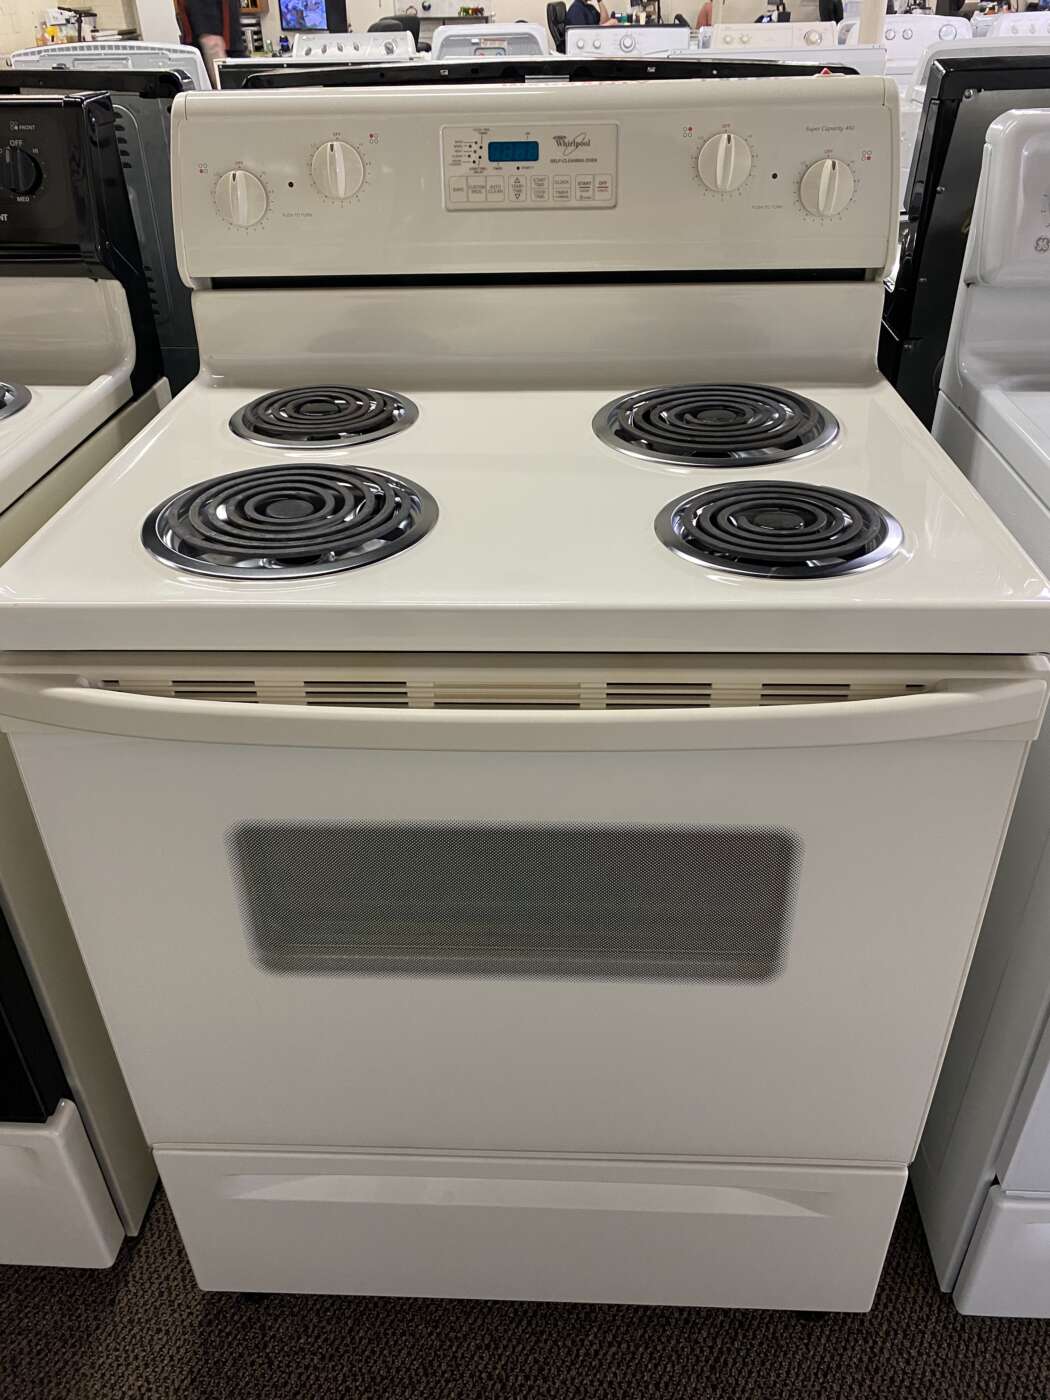 Reconditioned WHIRLPOOL Self-Clean Electric Range – Bisque